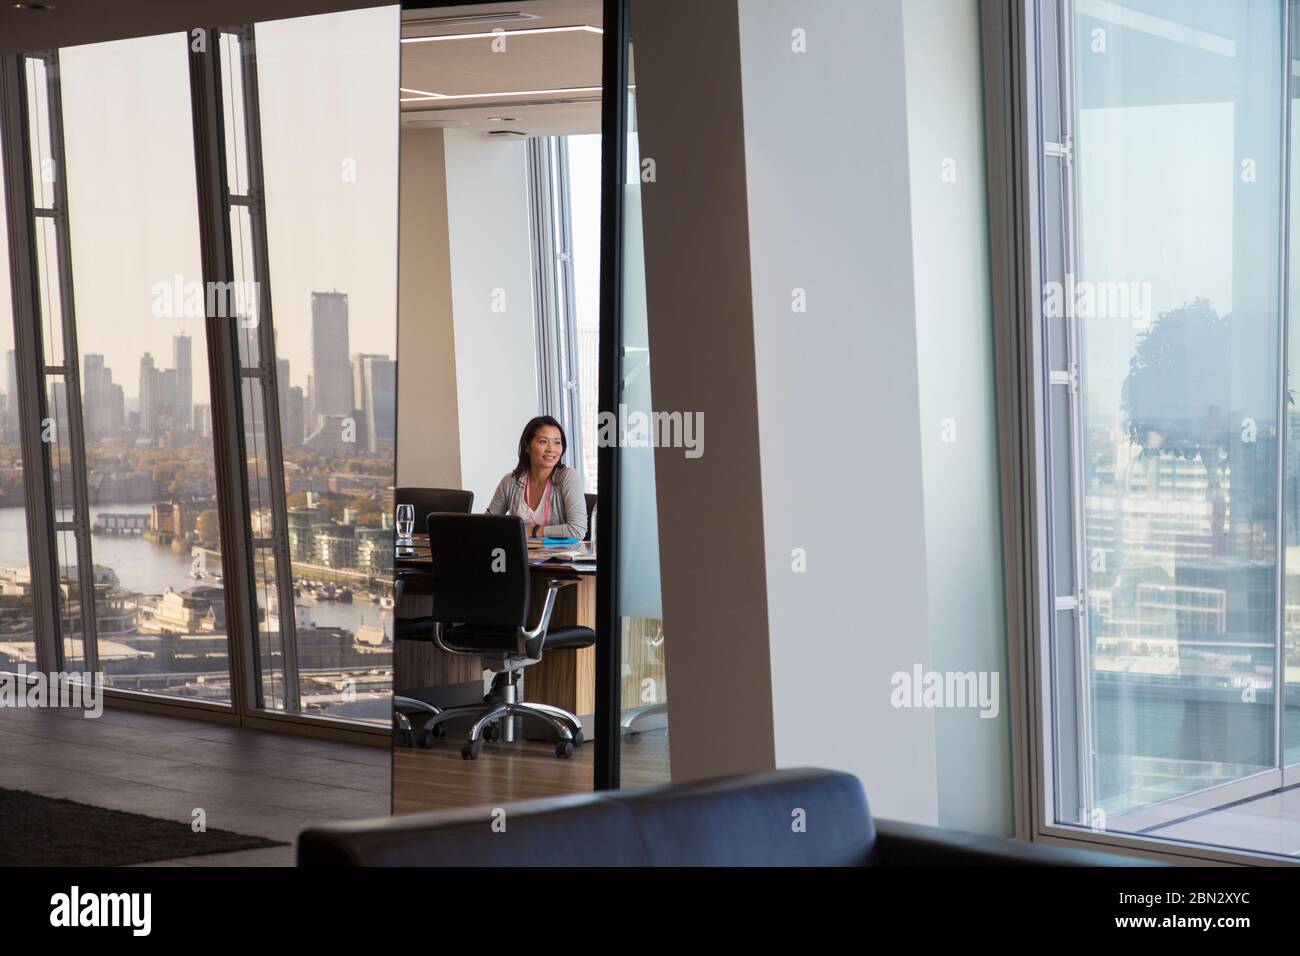 Businesswoman in urban highrise conference room Stock Photo